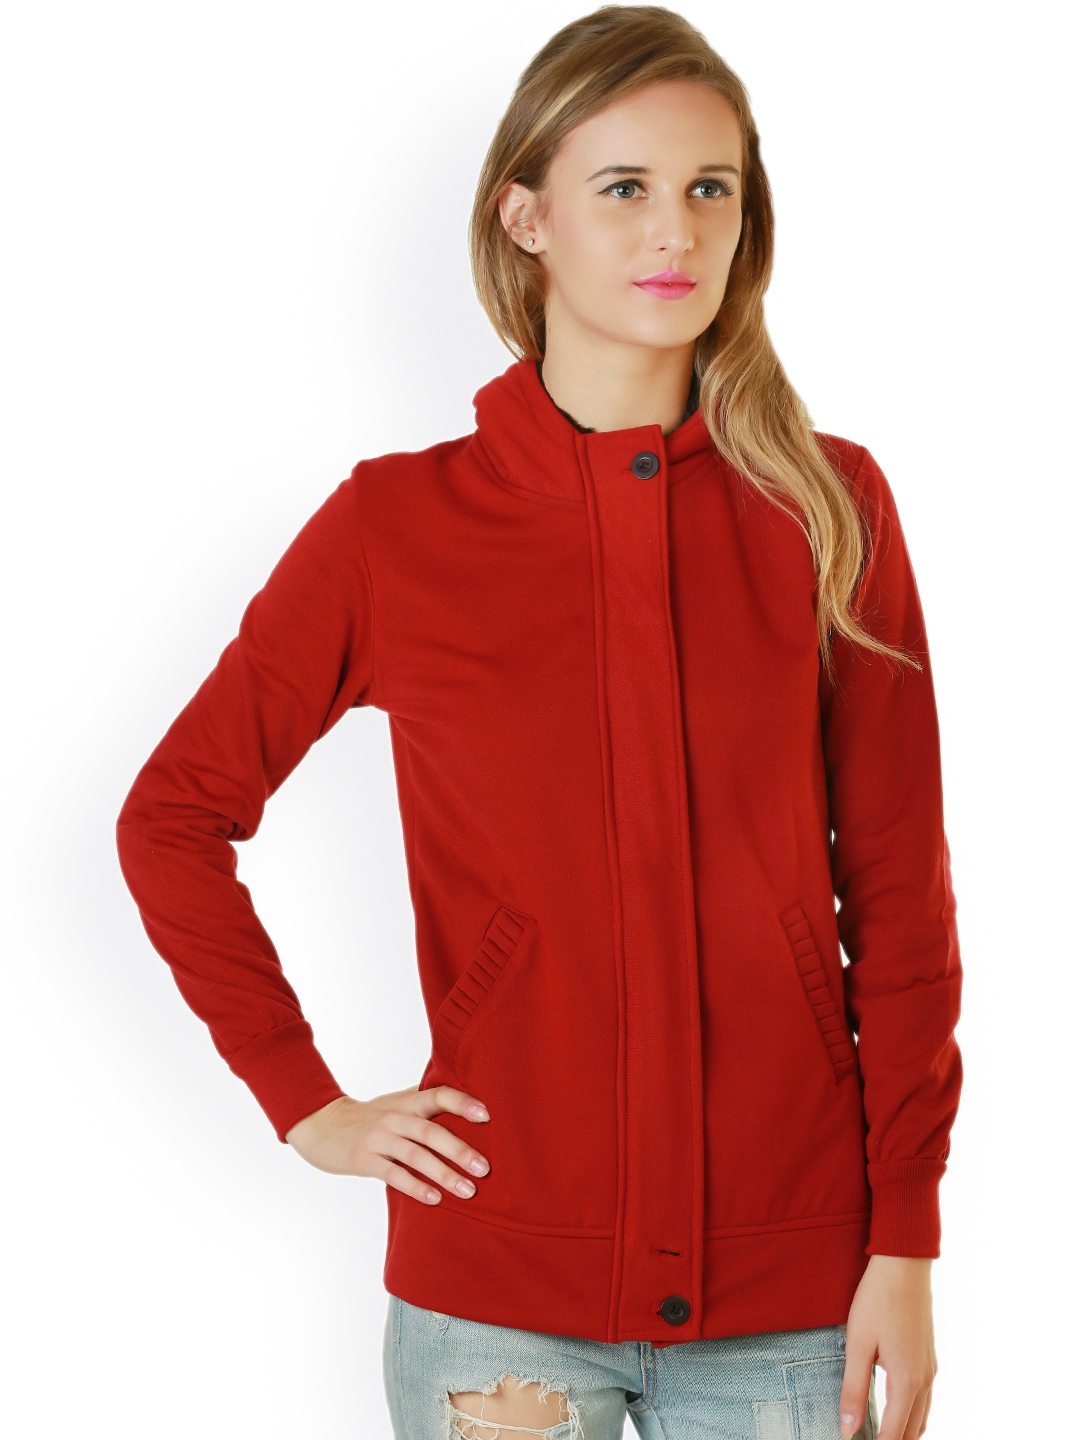 Belle Fille Red Hooded Jacket Price in India